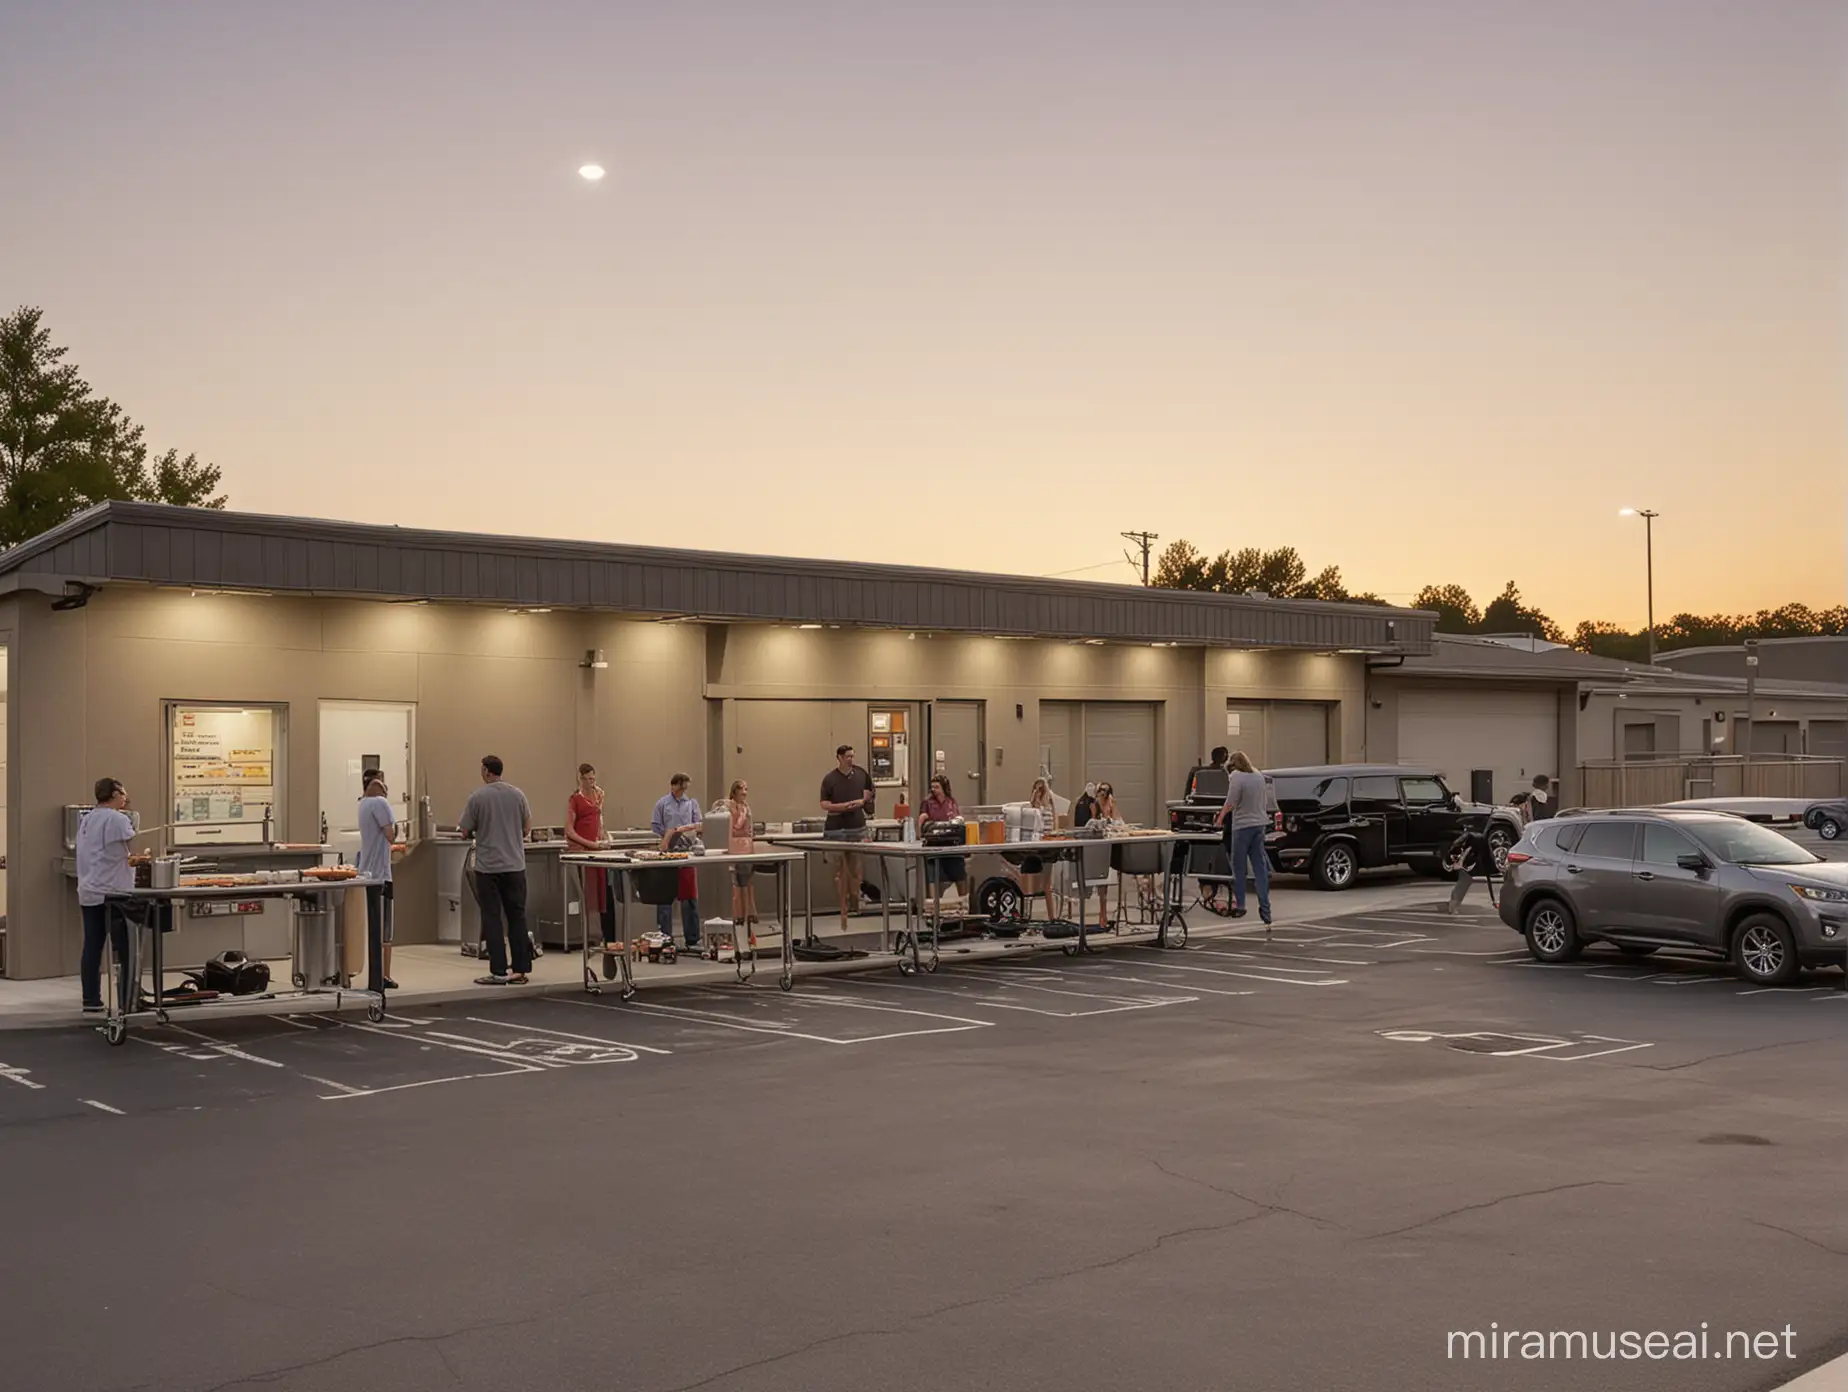 4 groups of 4 people are standing around high tables enjoying food. one barbeque grill can be seen. the location is a parking lot in front of a 1-story small car maintenance garage. the time is around sunset in the summer. a car is parked in front of the garage